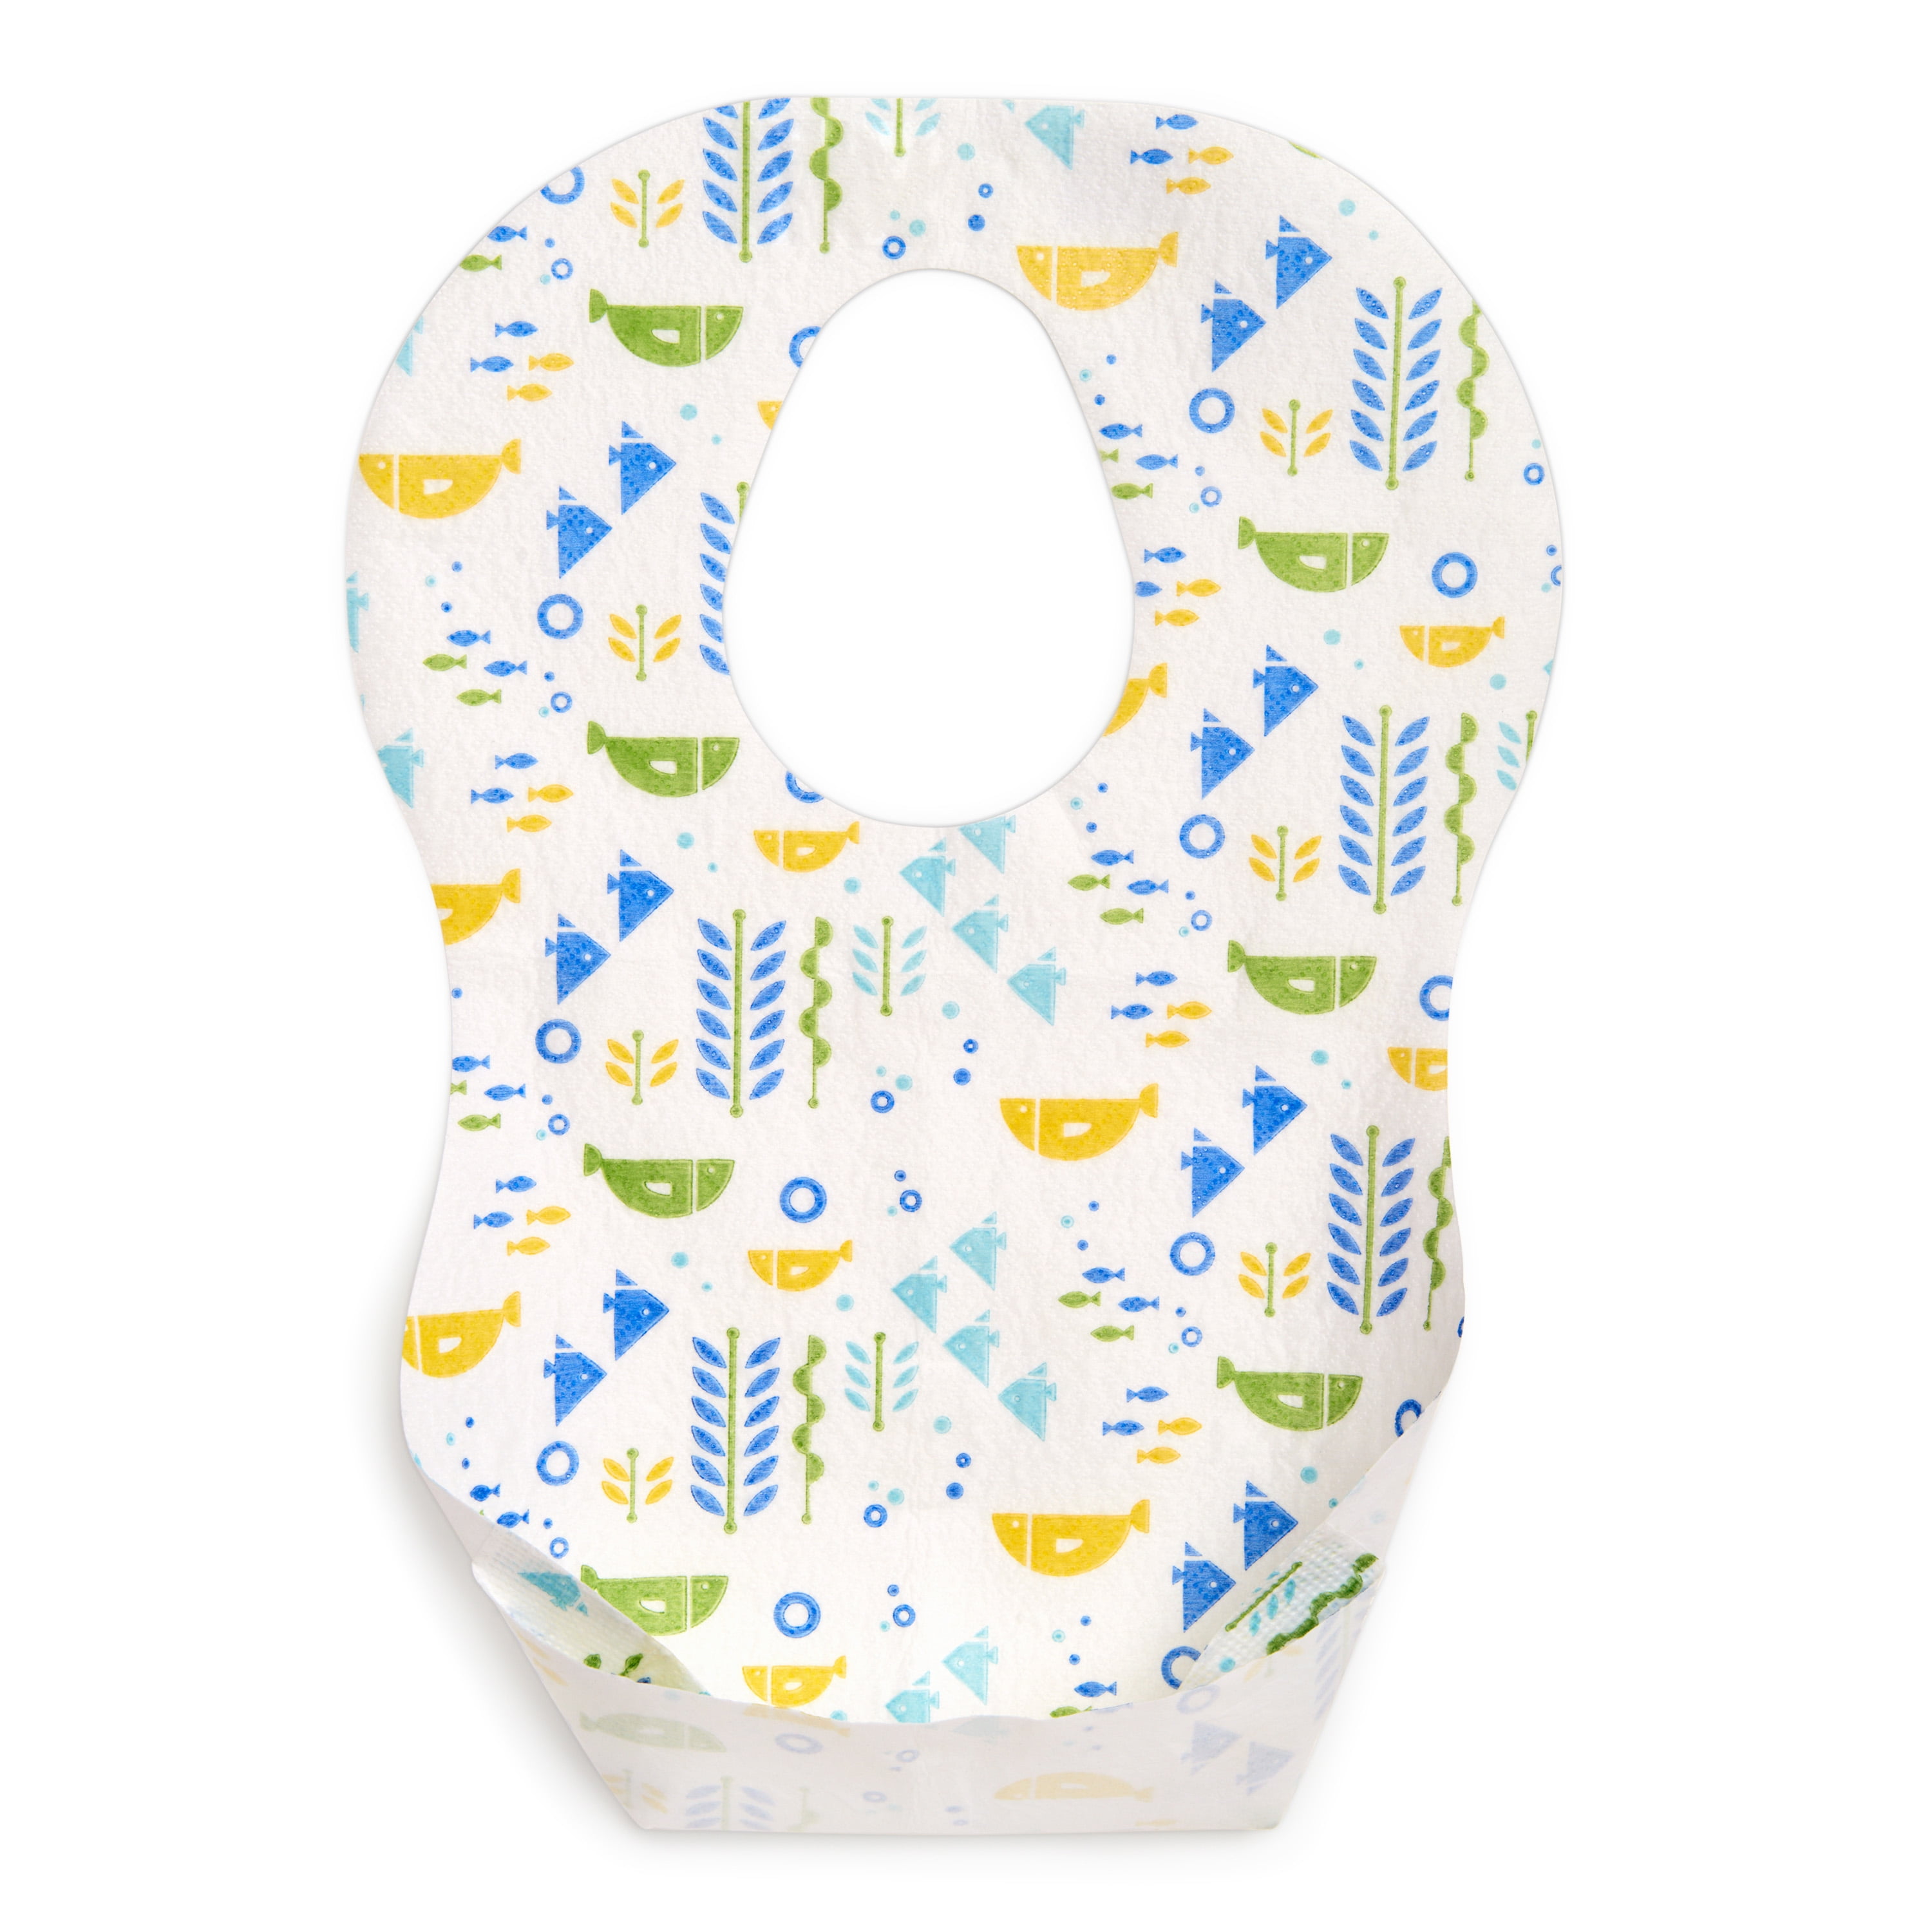 Baby Toddler Disposable Bibs W Pocket Hygenic Easy To Use Travel Holidays 10Pack 